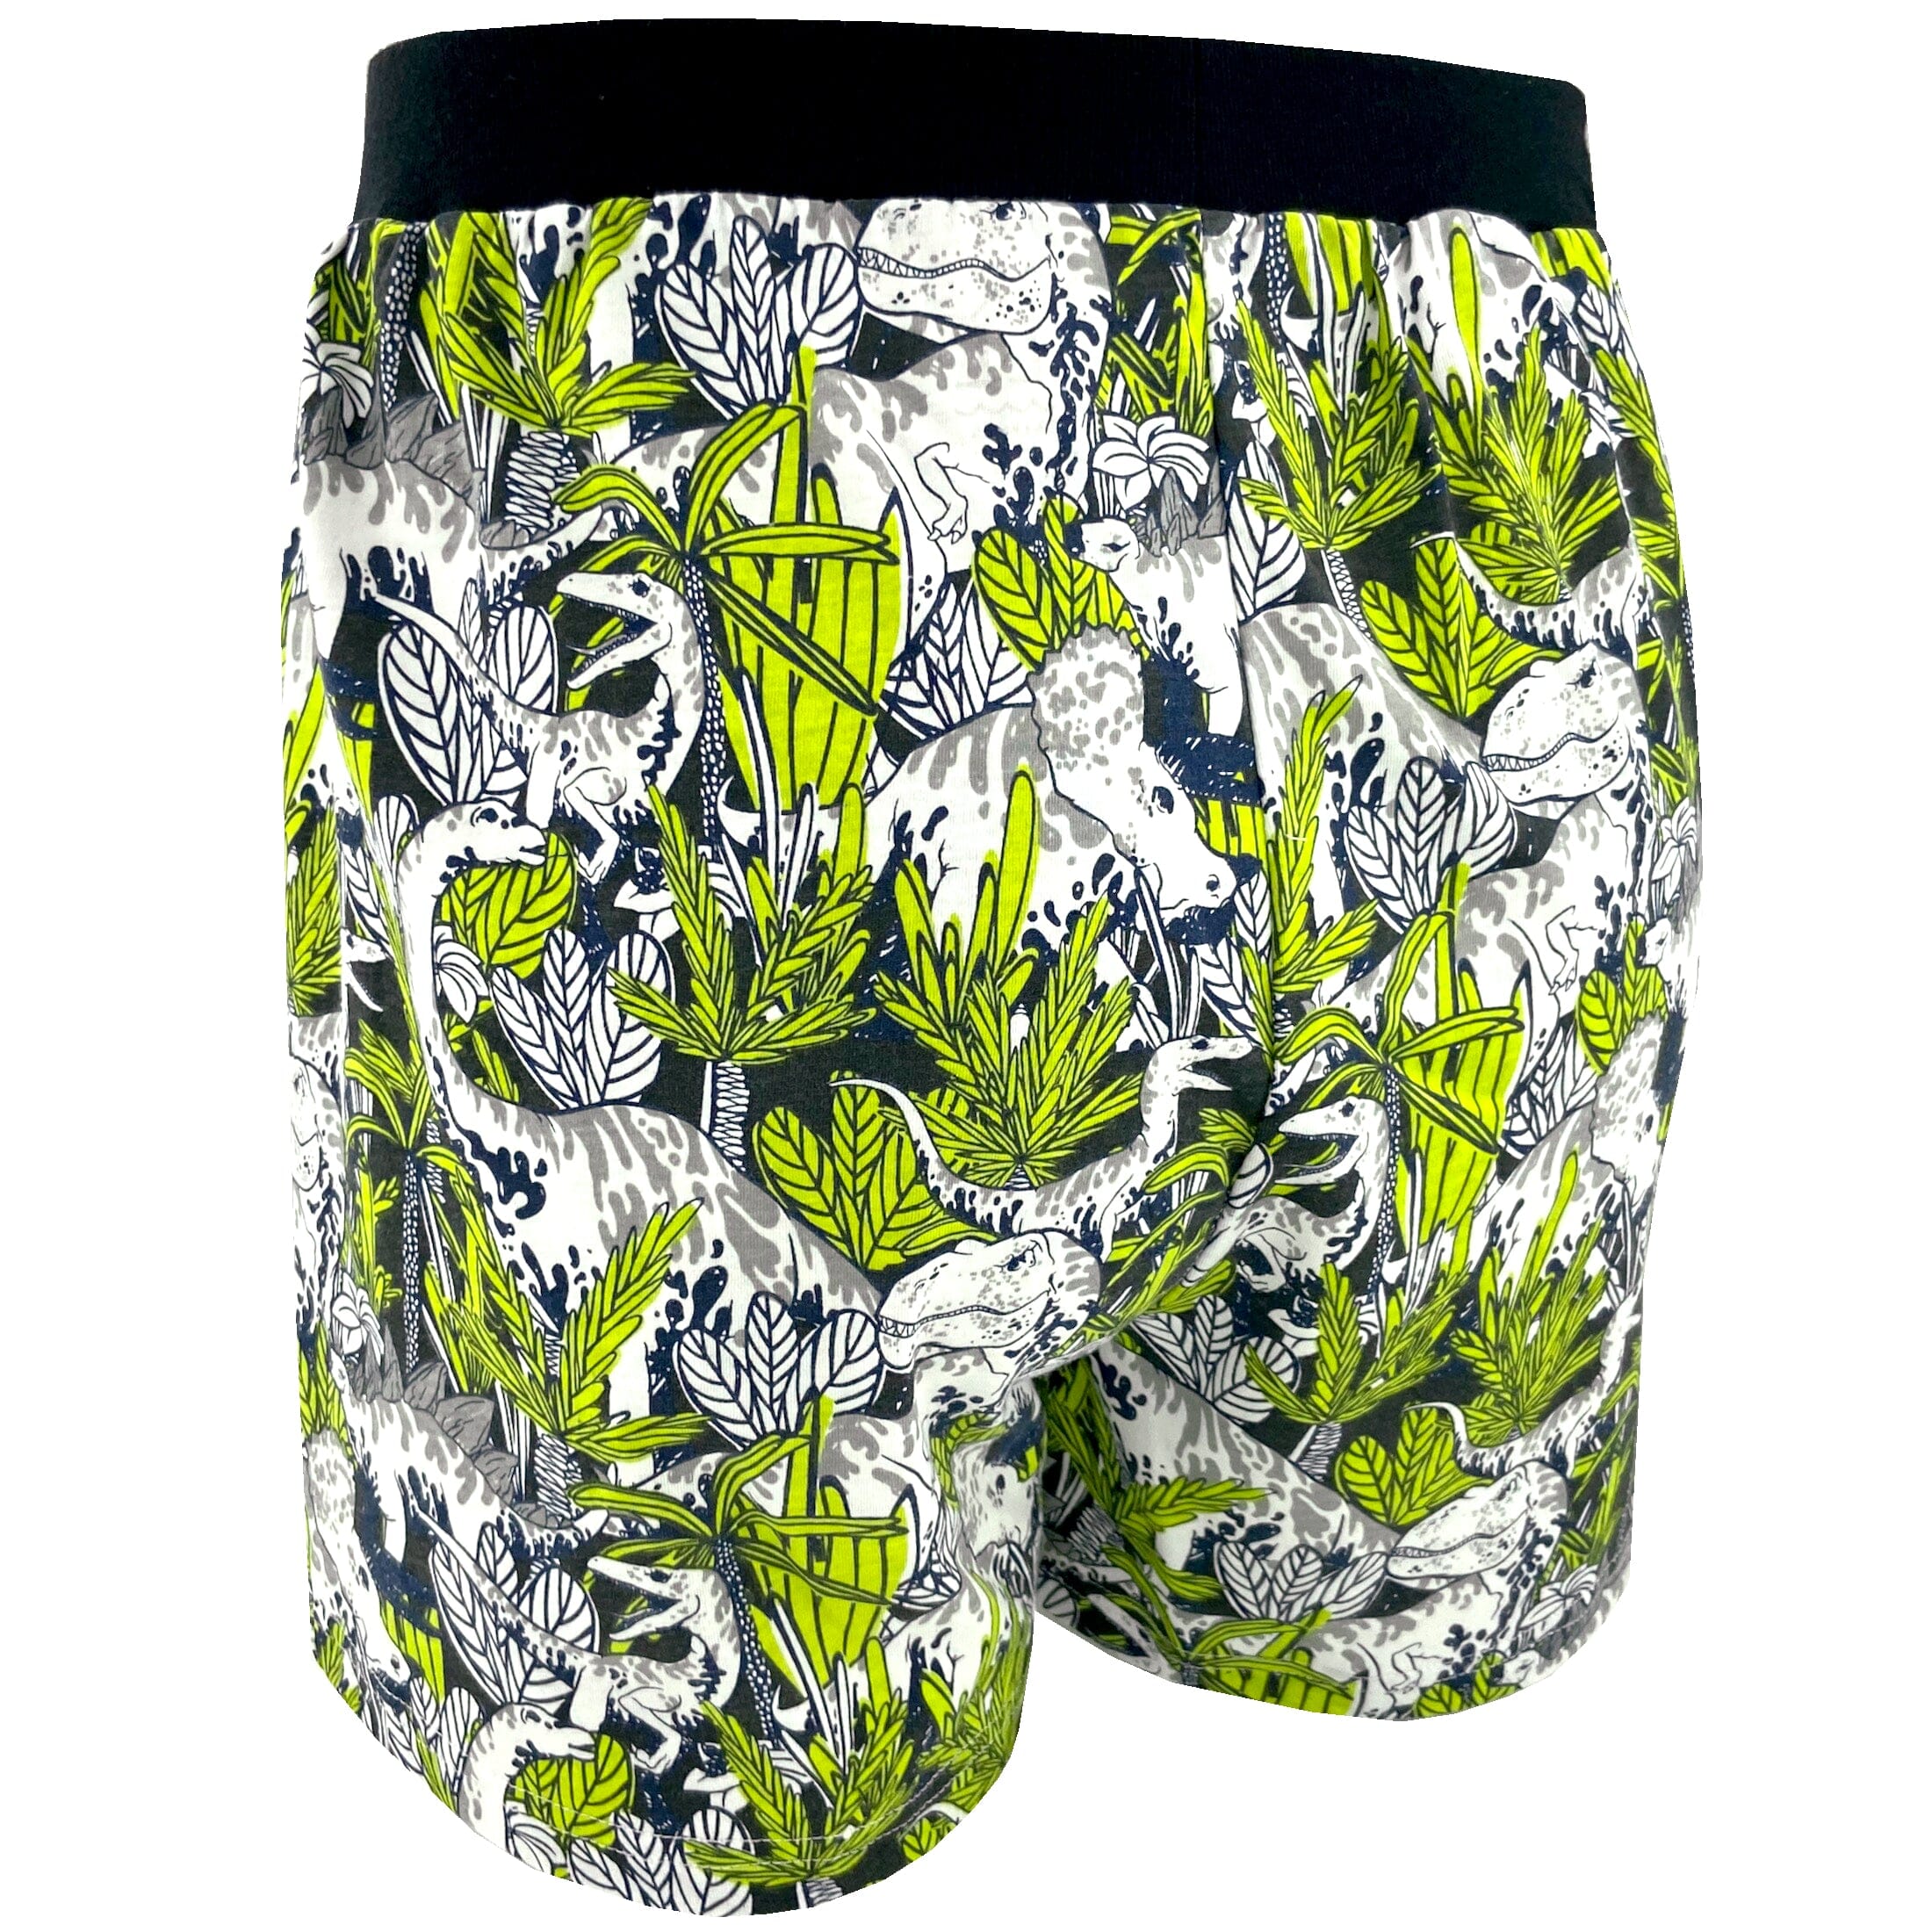 Comfy Loungewear Dinosaur All Over Print Cotton Pajama Shorts for Men